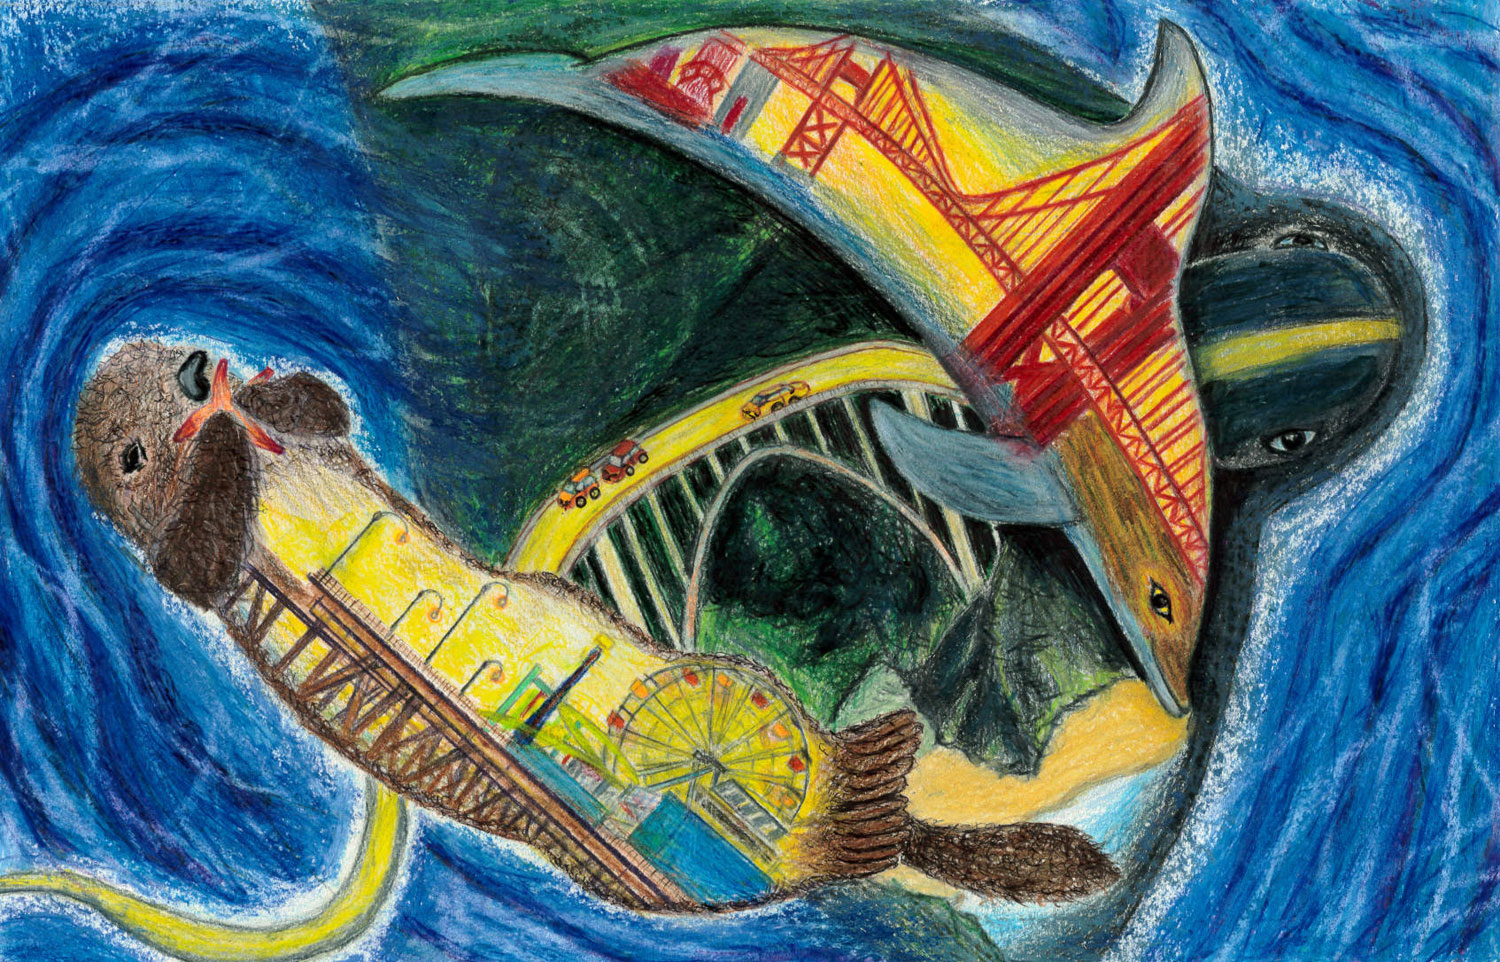 Ocean animals with California coastal scenes drawn within their outlines, in colored pencil and marker